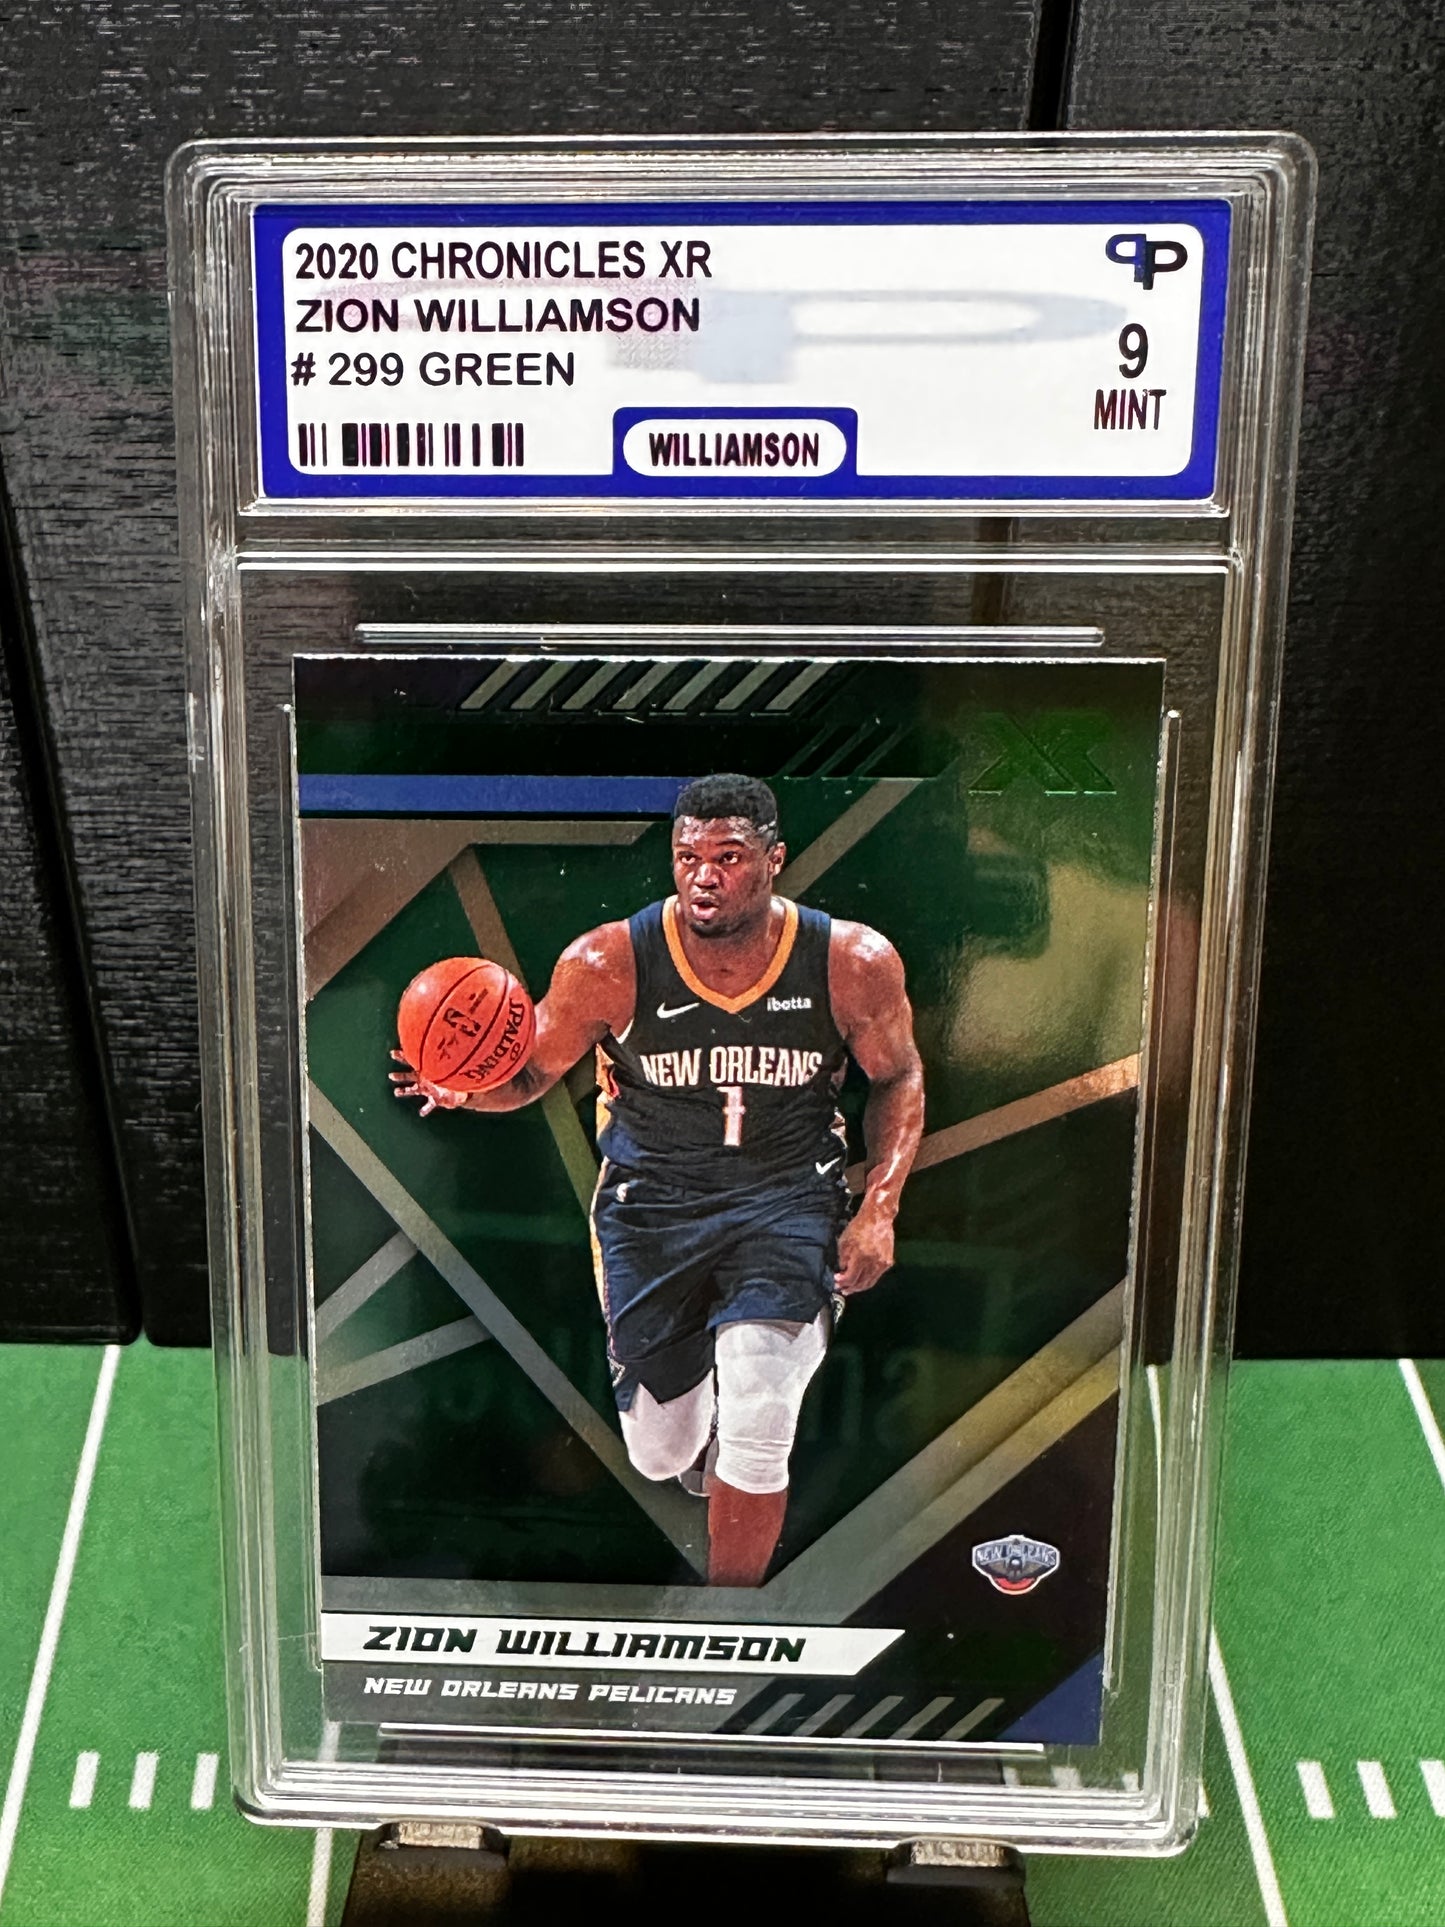 2020-21 Panini Chronicles XR Zion Williamson #299 Pelicans PPG 9